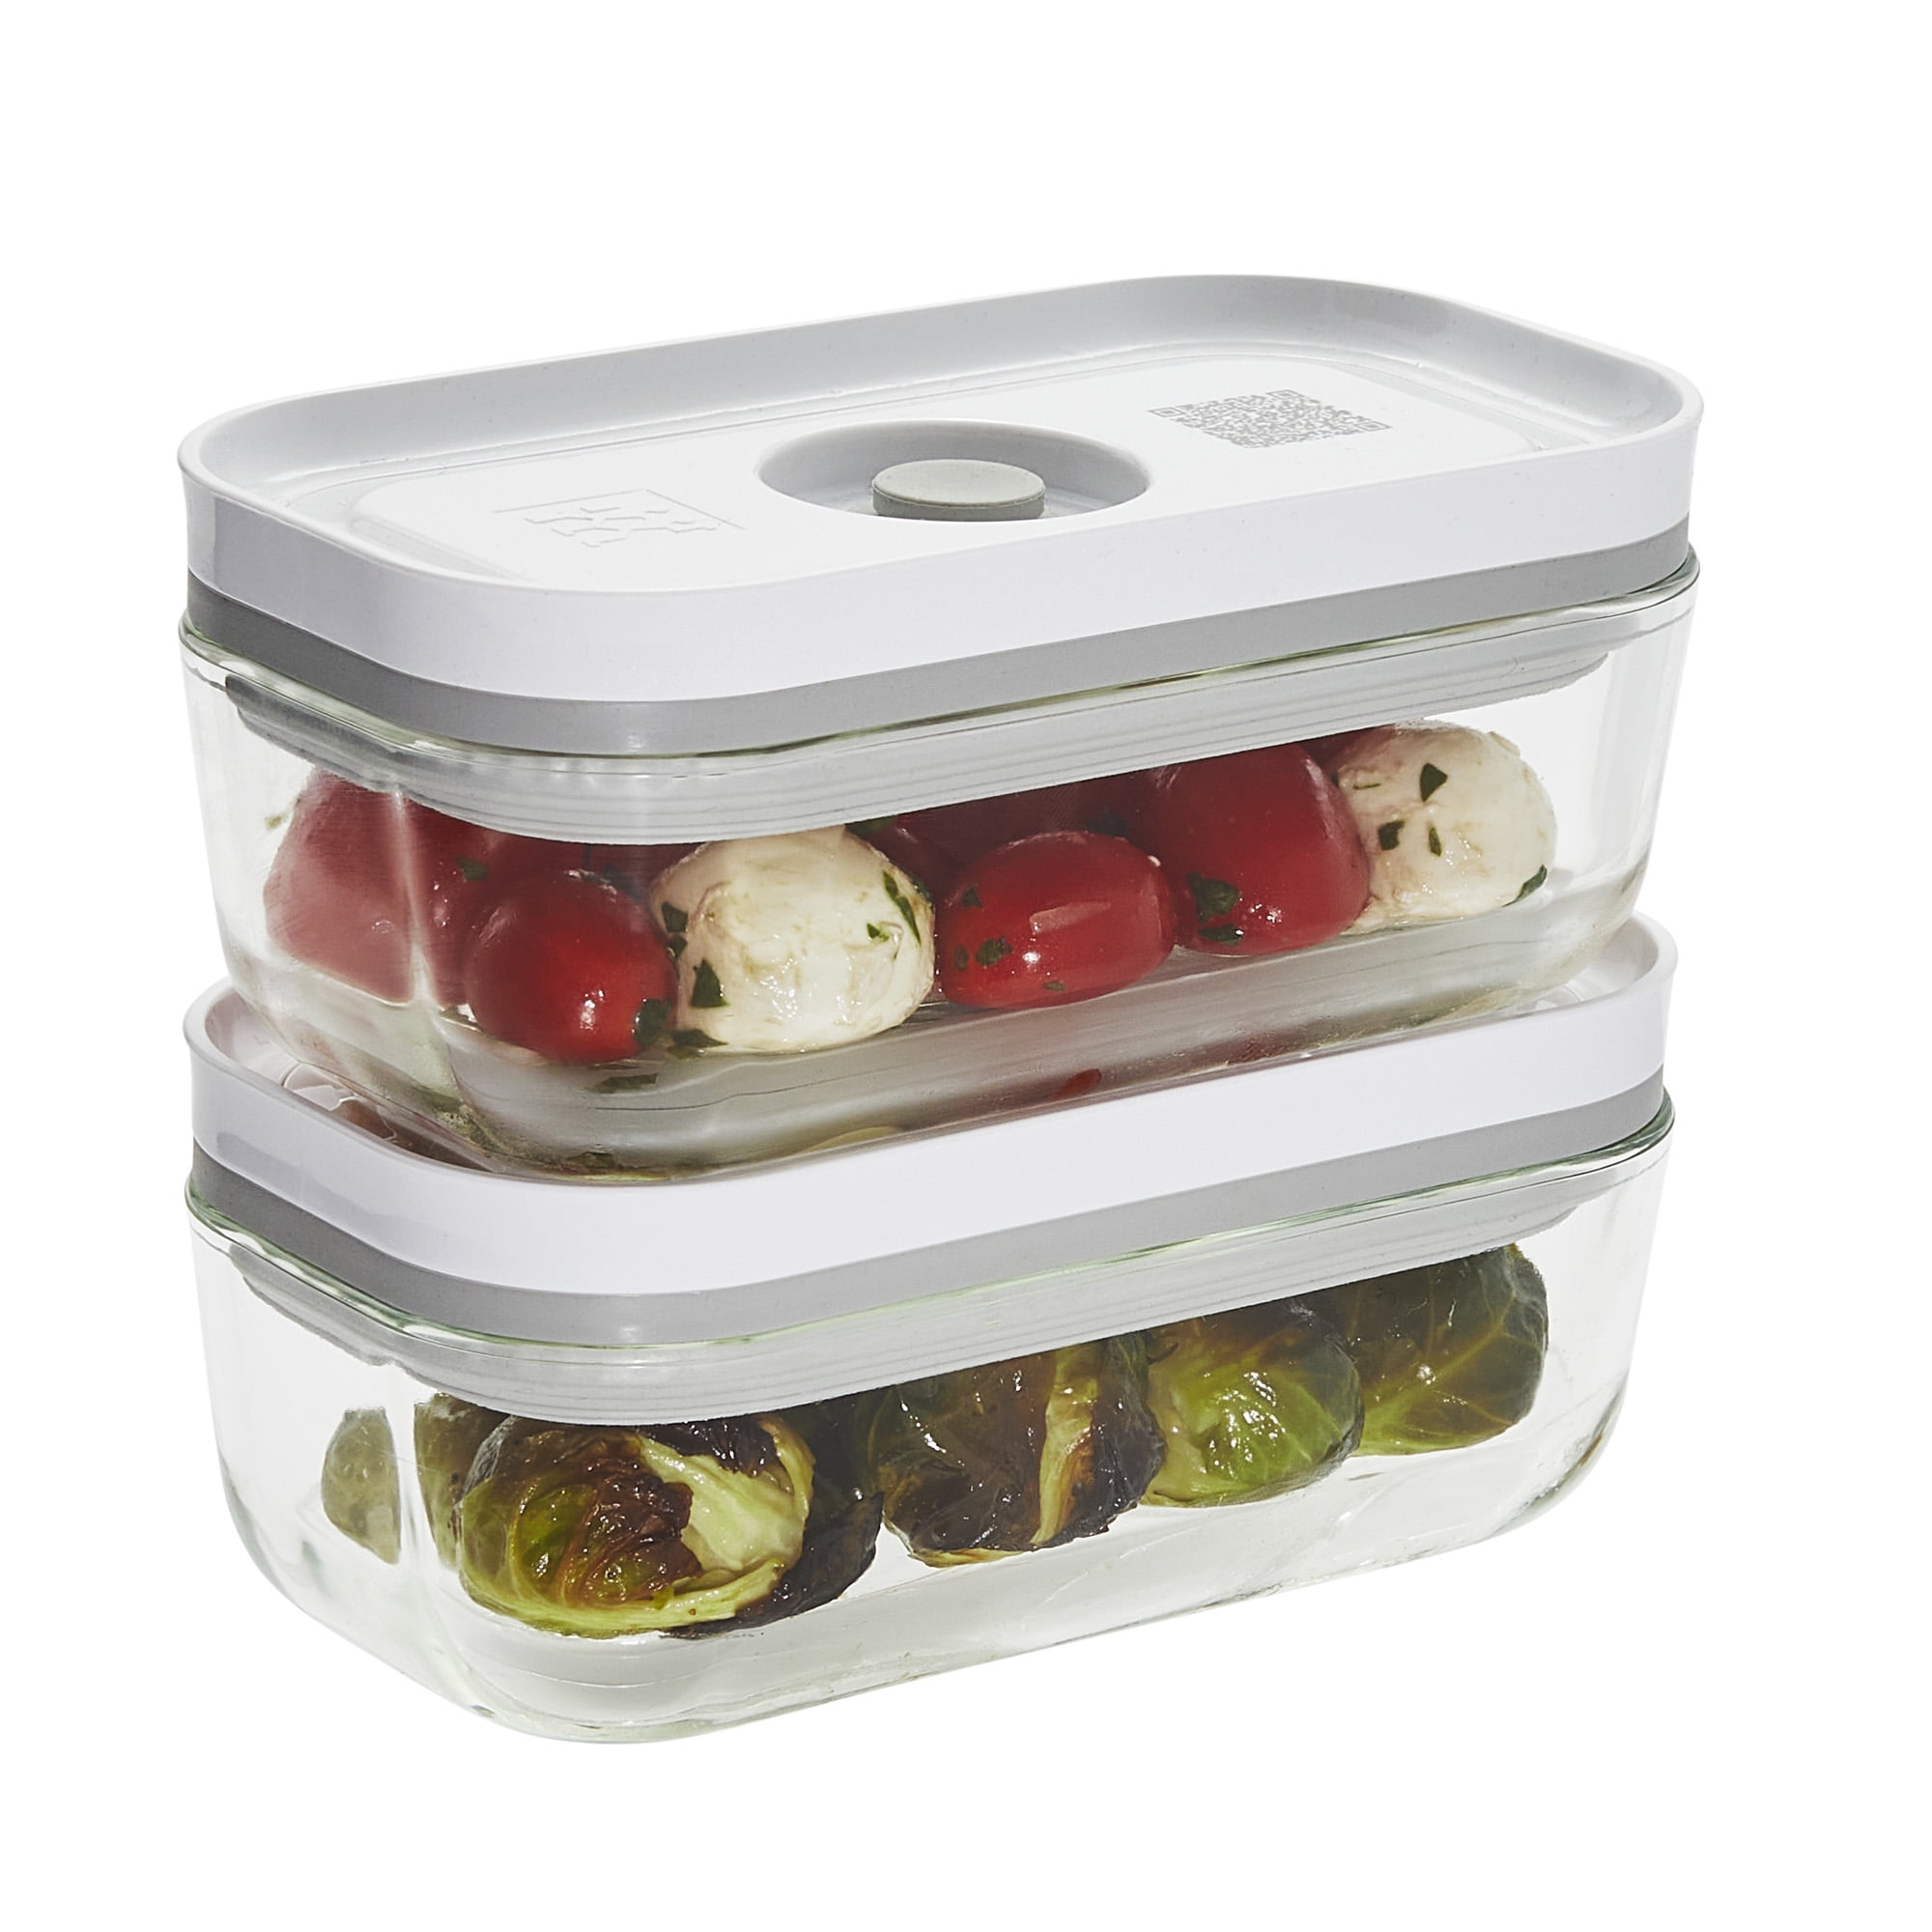 2PCS Vacuum Seal Food Storage Containers, Vakumar Vacuum Sealer containers  Fresh Save & Keep the Flavor, Square, BPA-Free, Leak Proof, Lid with Lock 